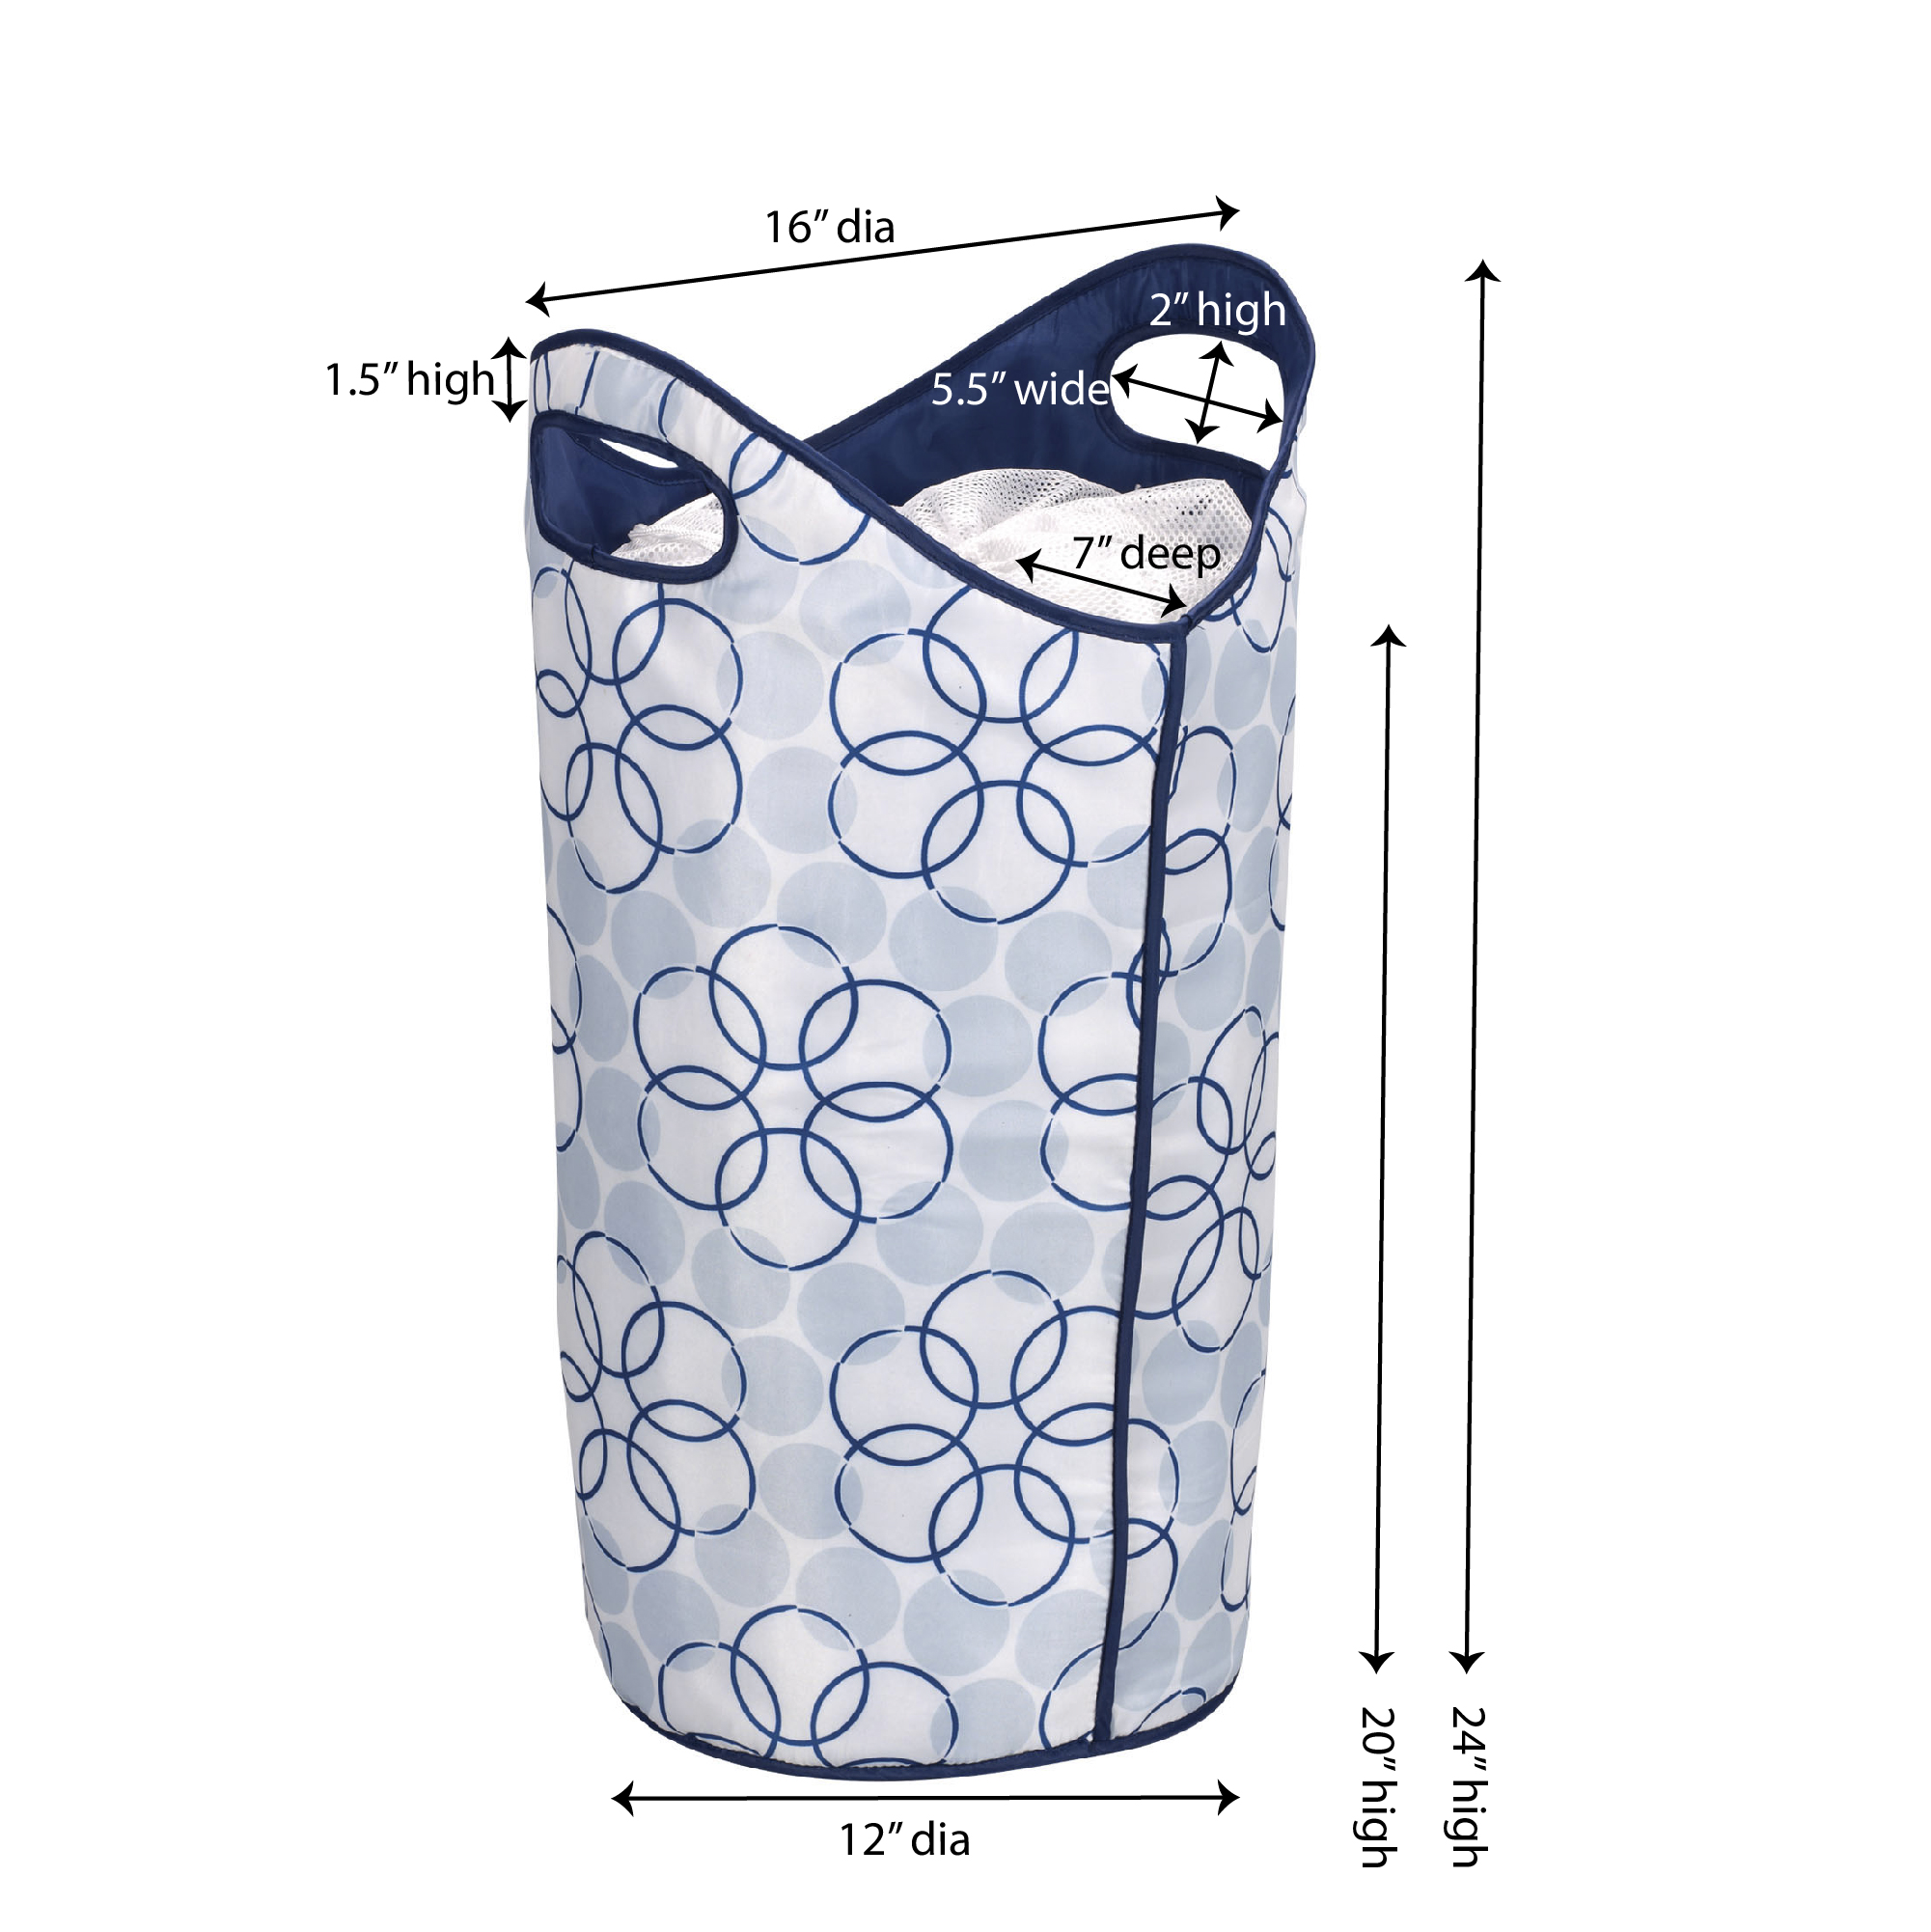 Household Essentials Patterned Laundry Hamper Tote - image 4 of 4